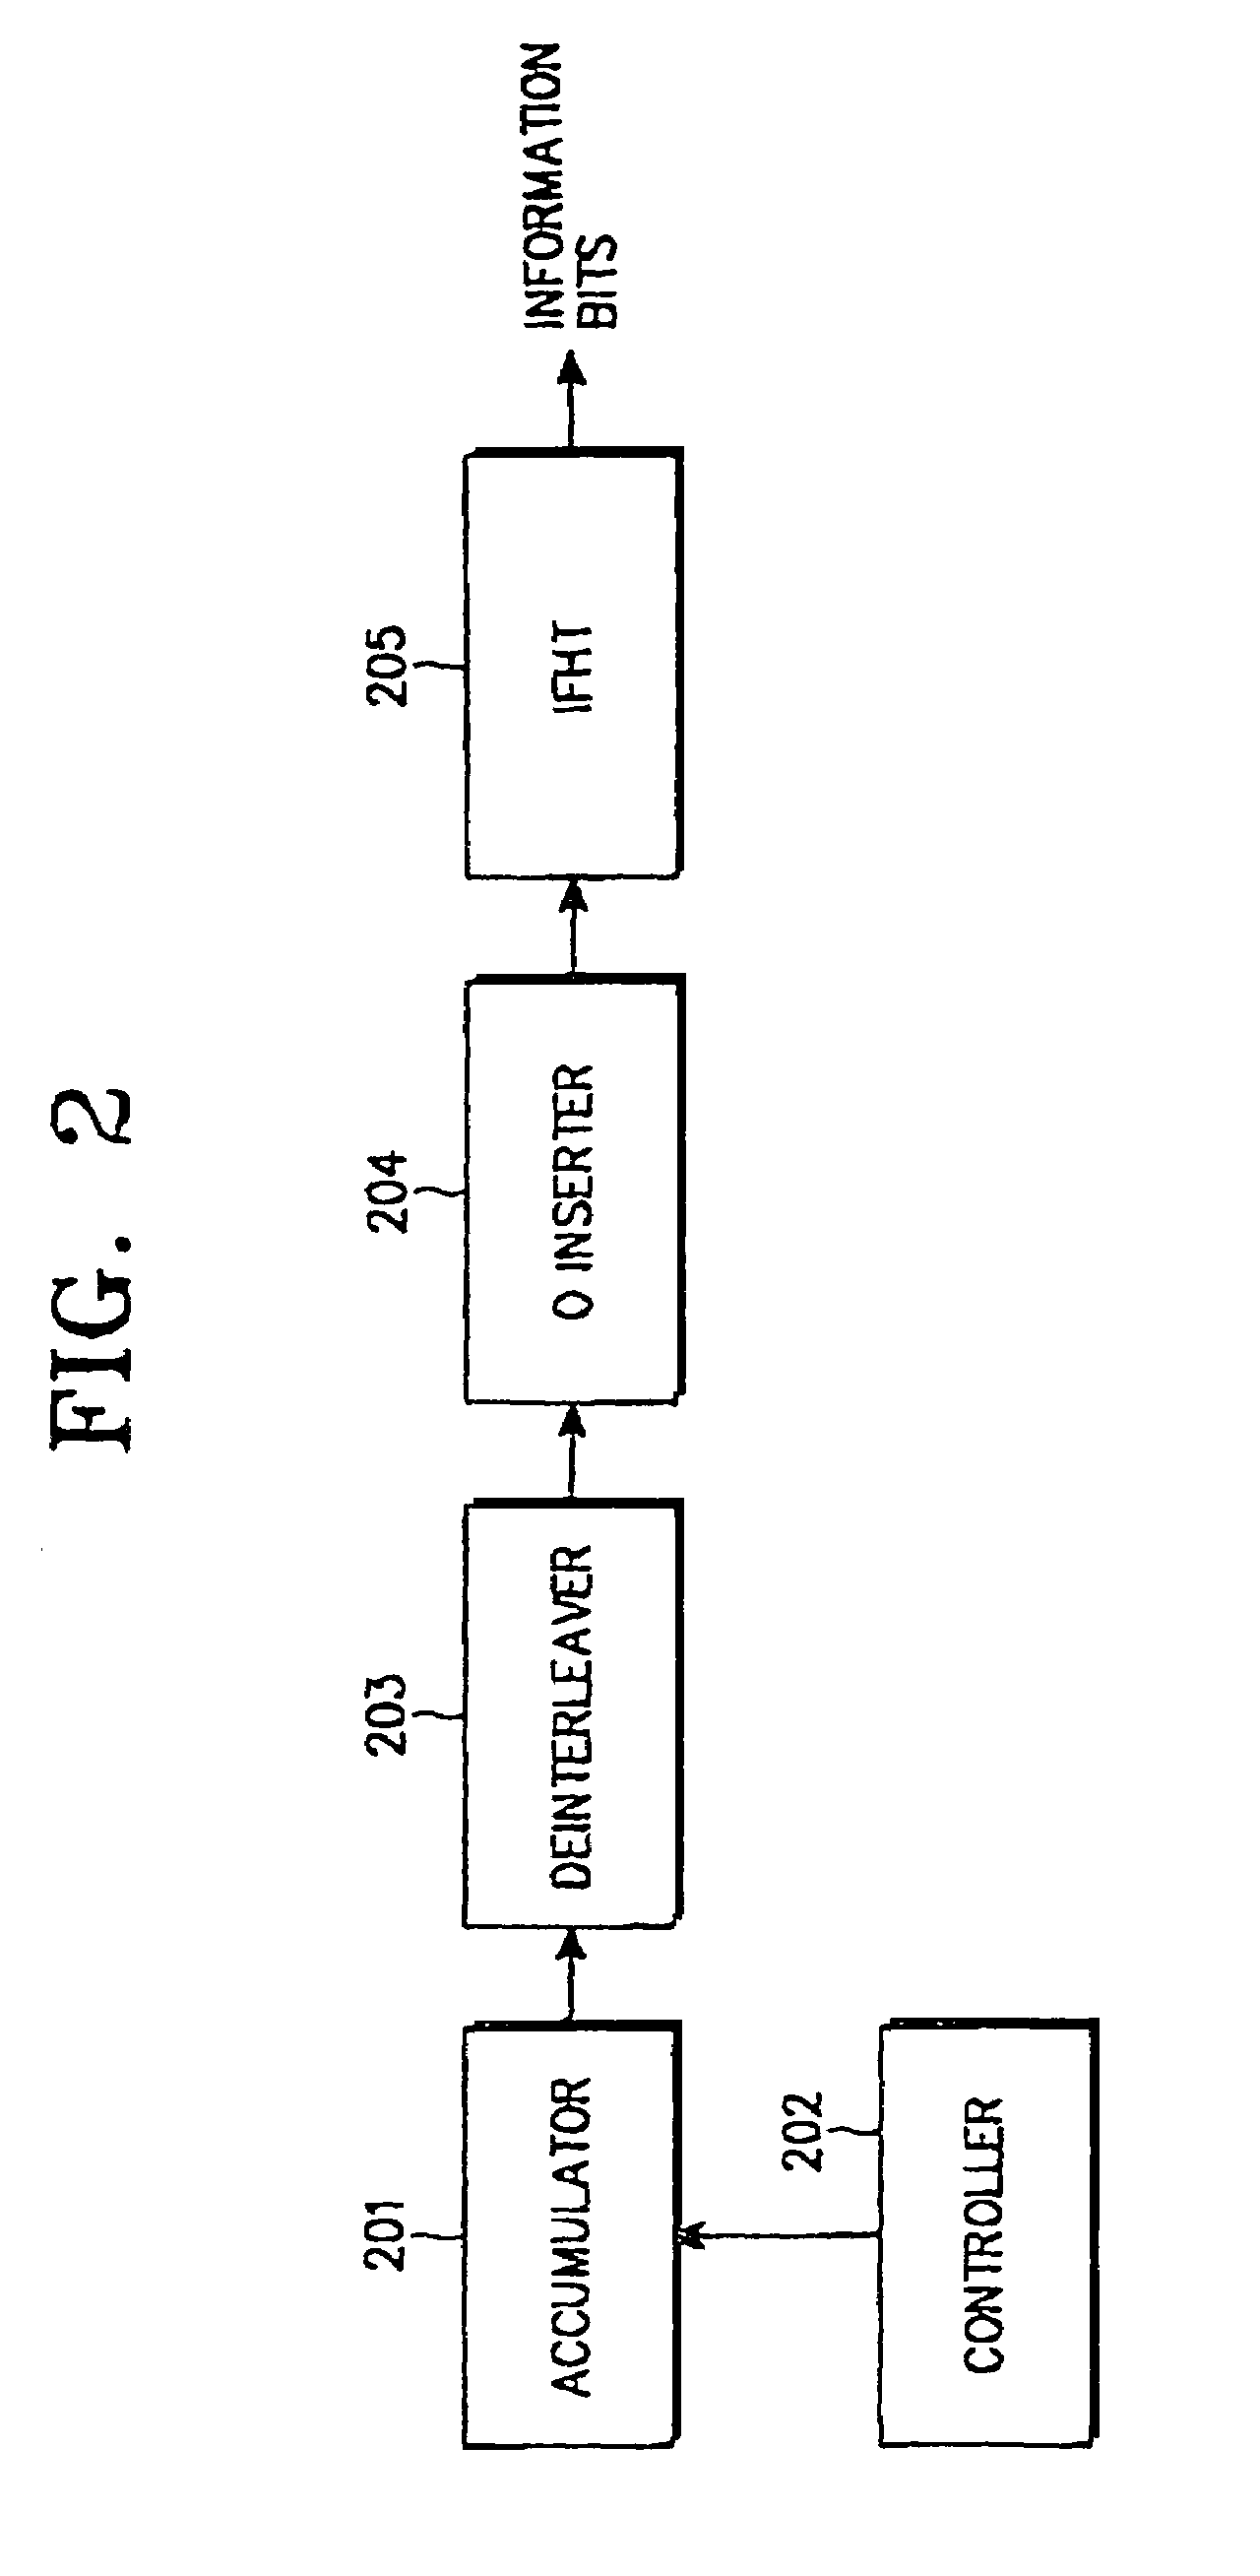 Apparatus and method for generating (n,3) code and (n,4) code using simplex codes